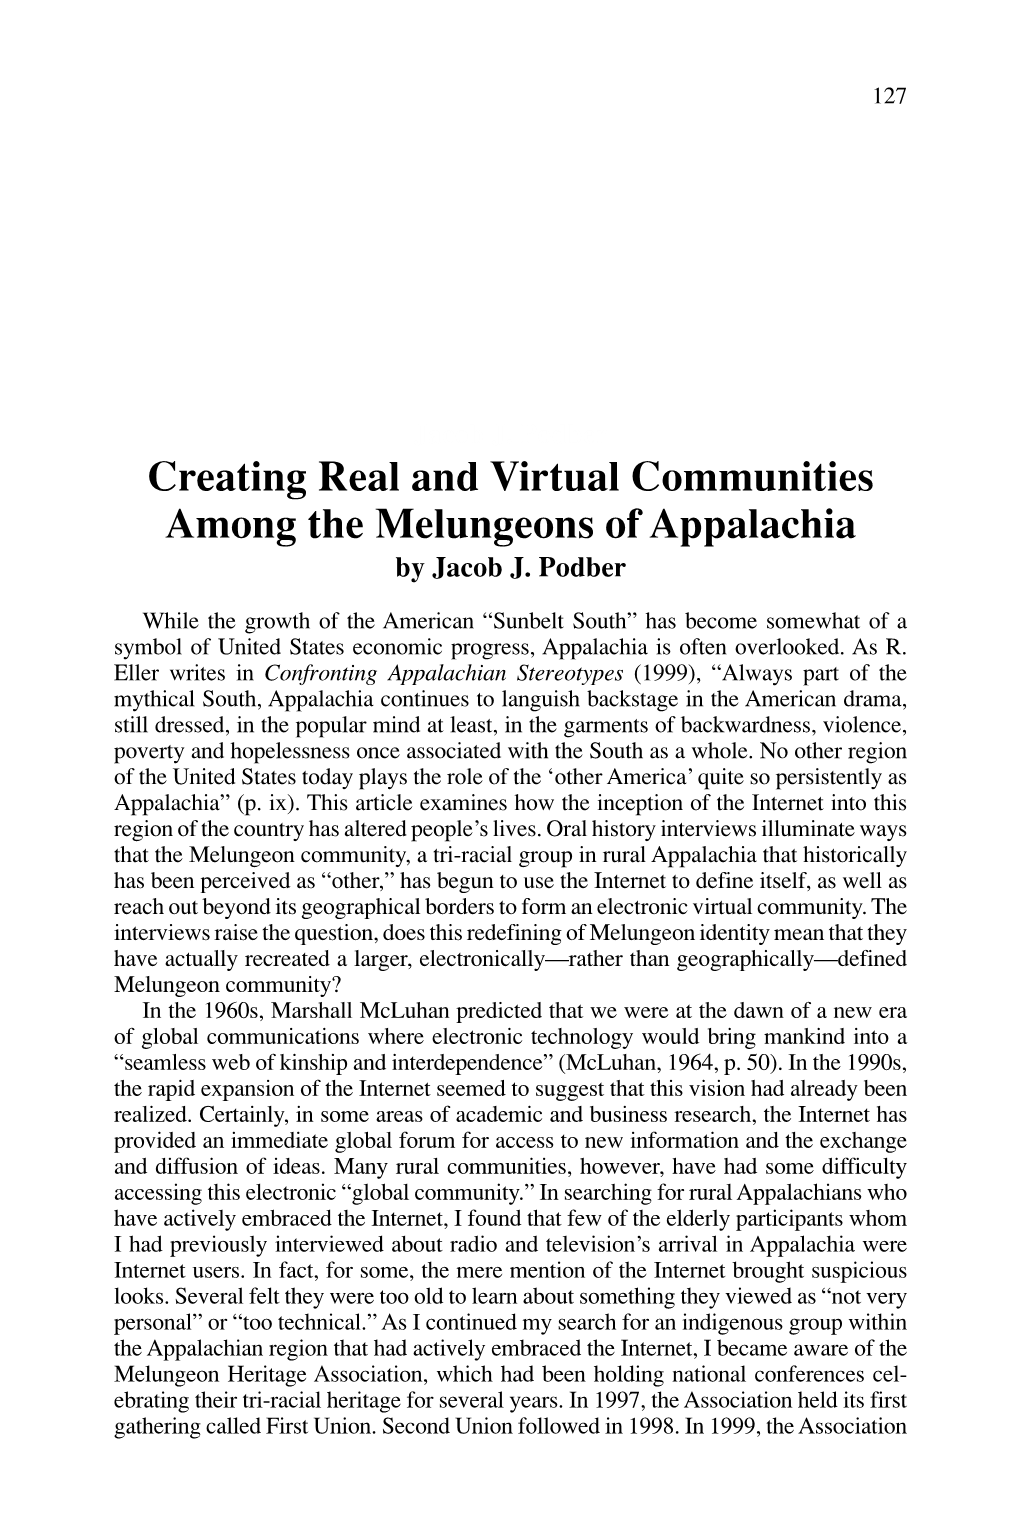 Creating Real and Virtual Communities Among the Melungeons of Appalachia by Jacob J